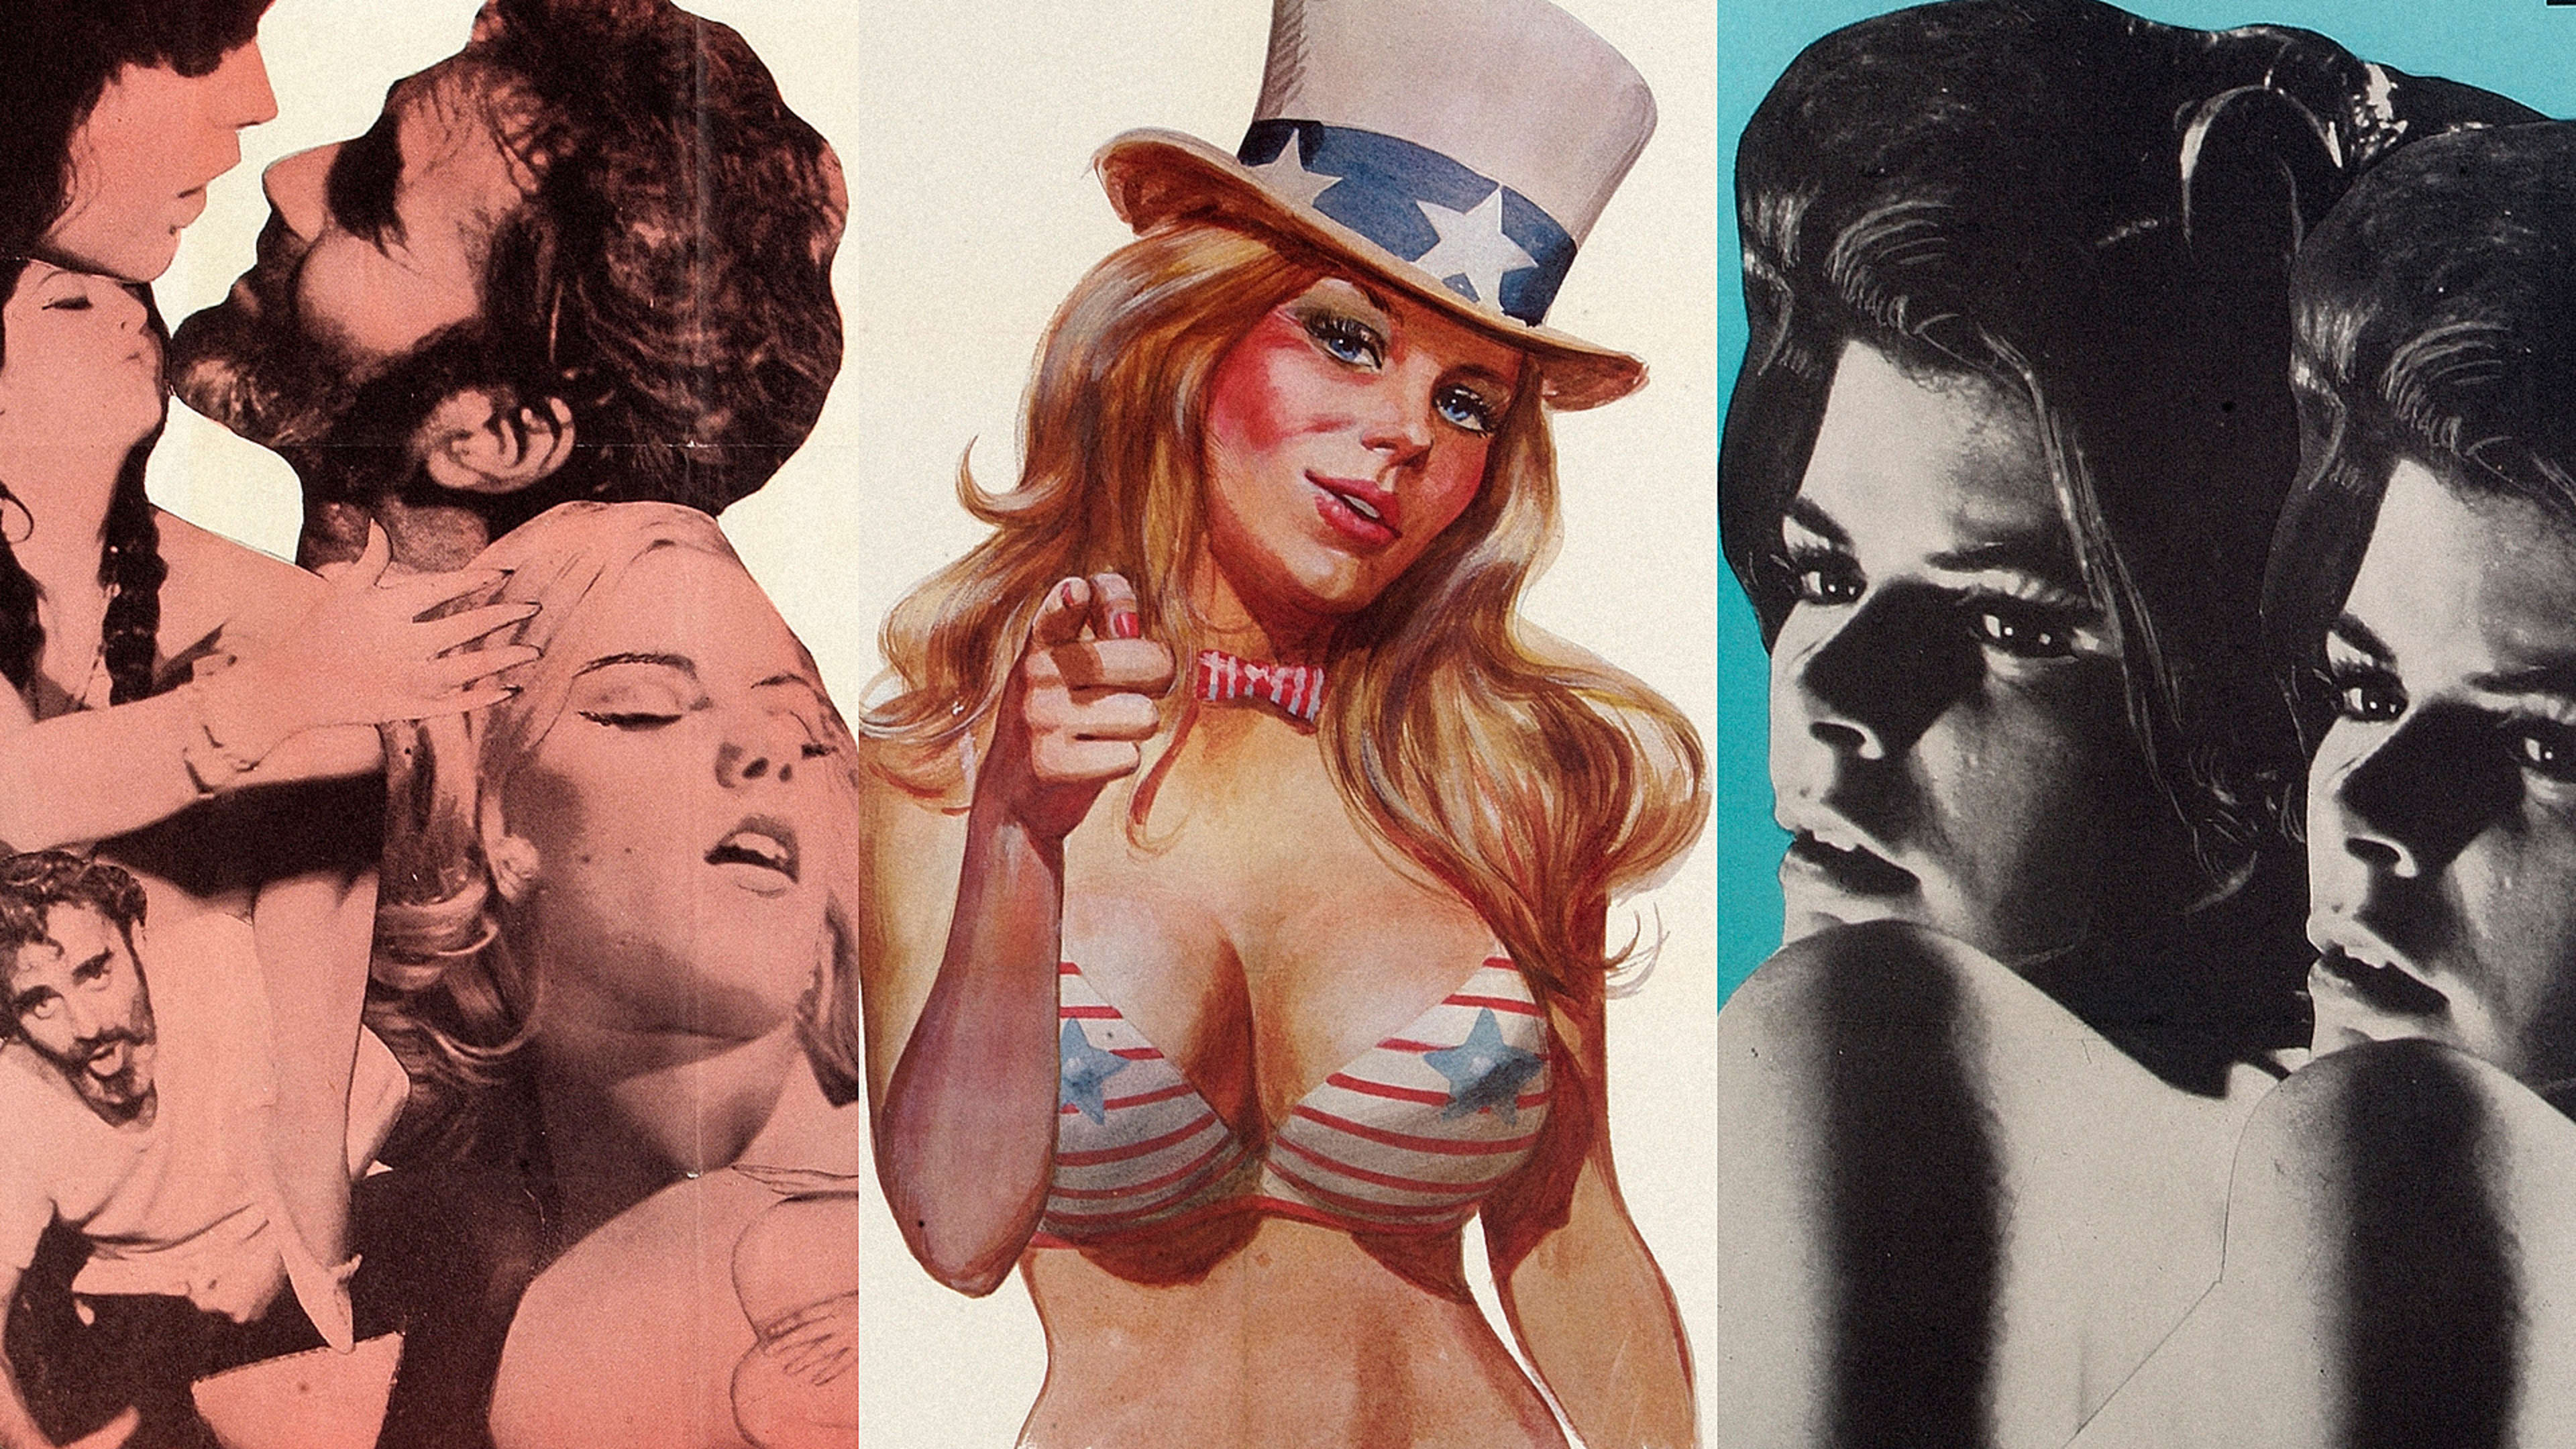 70 S Porn - The Glorious Graphic Design Of '70s Porn (NSFW) - Fast Company